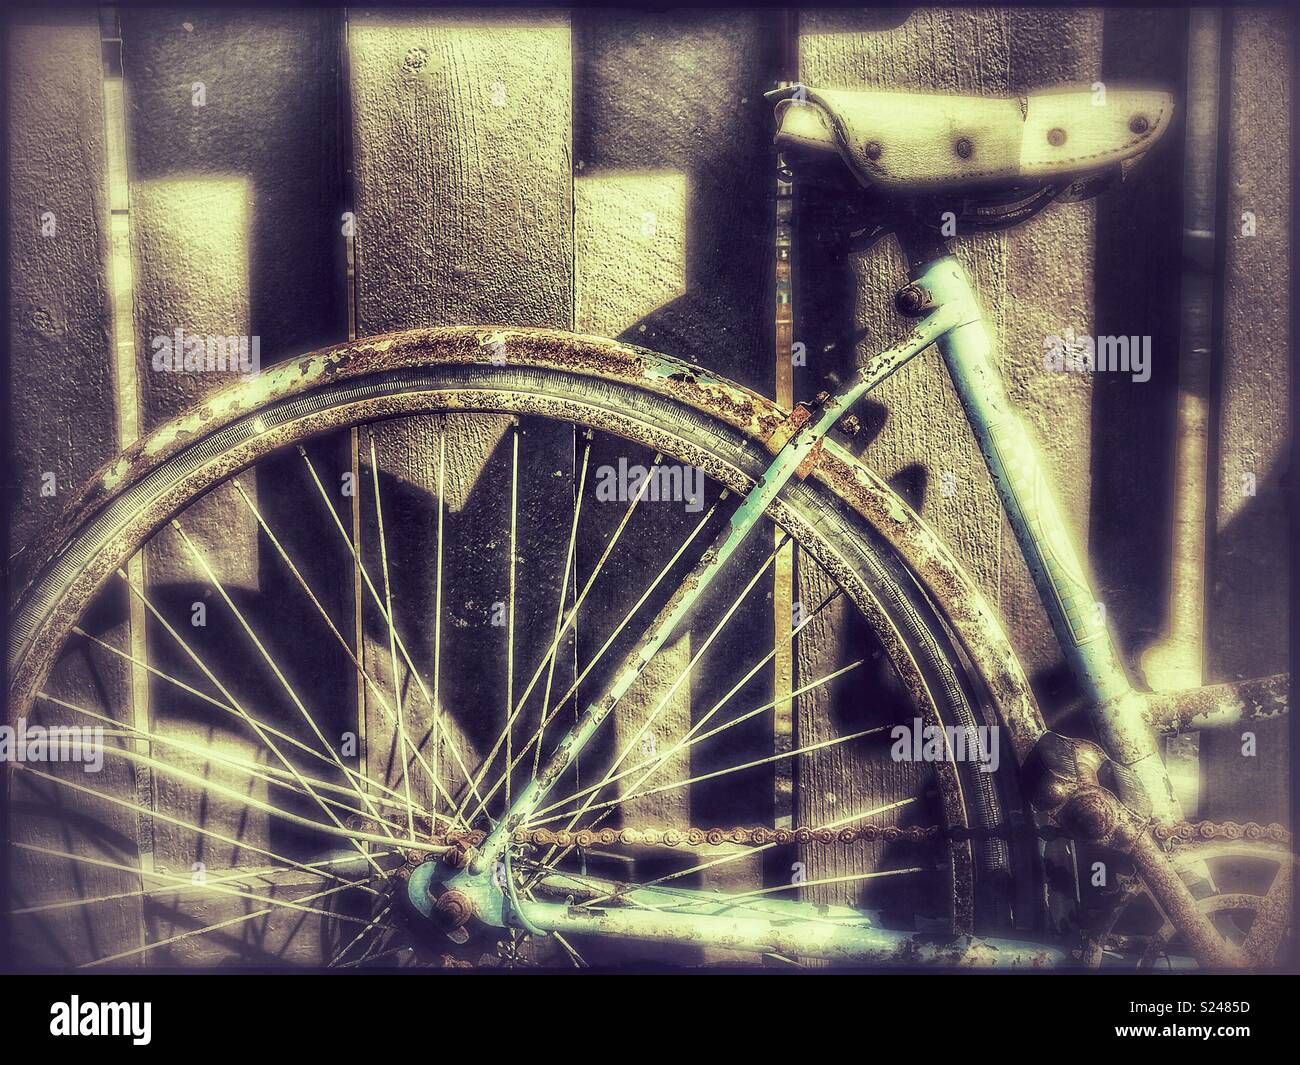 Rusty old bicycle parked against a wooden fence Stock Photo